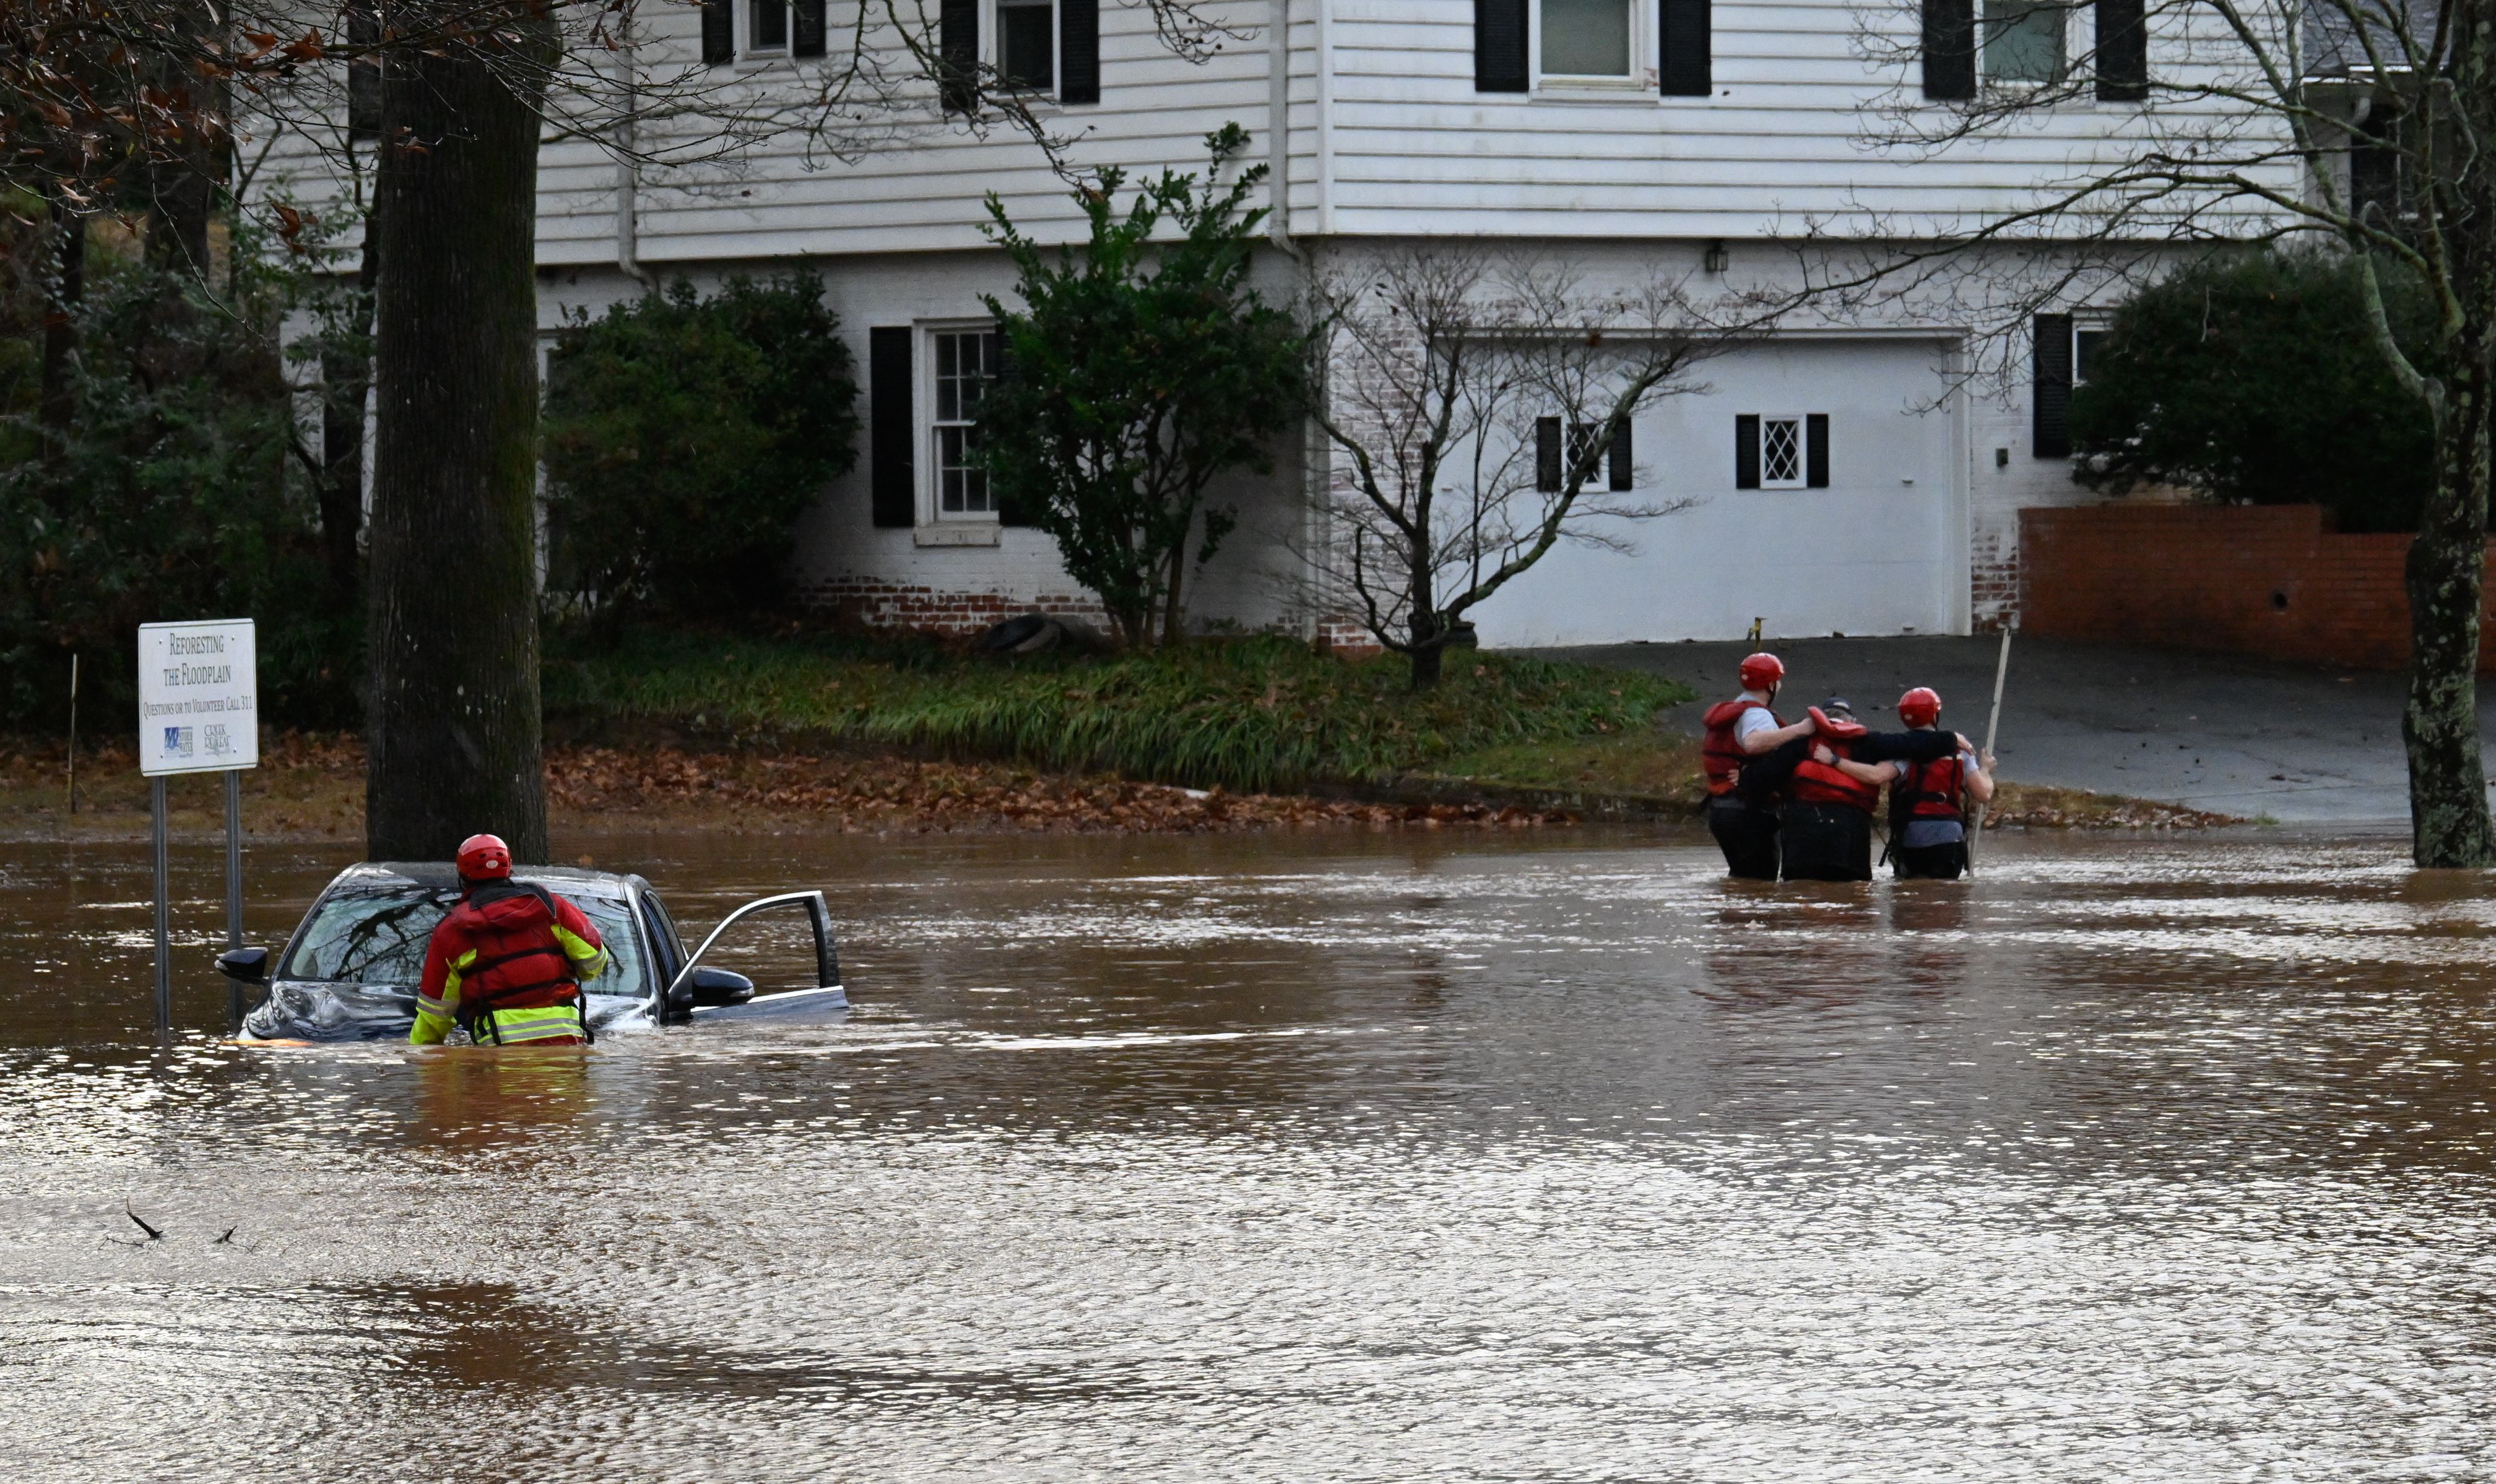 Firefighters rescue a man from a car stuck in a flooded area of in Charlotte, North Carolina, as storms move through the U.S. Southeast and the Carolinas, producing flooding, powerful winds and tornadoes.